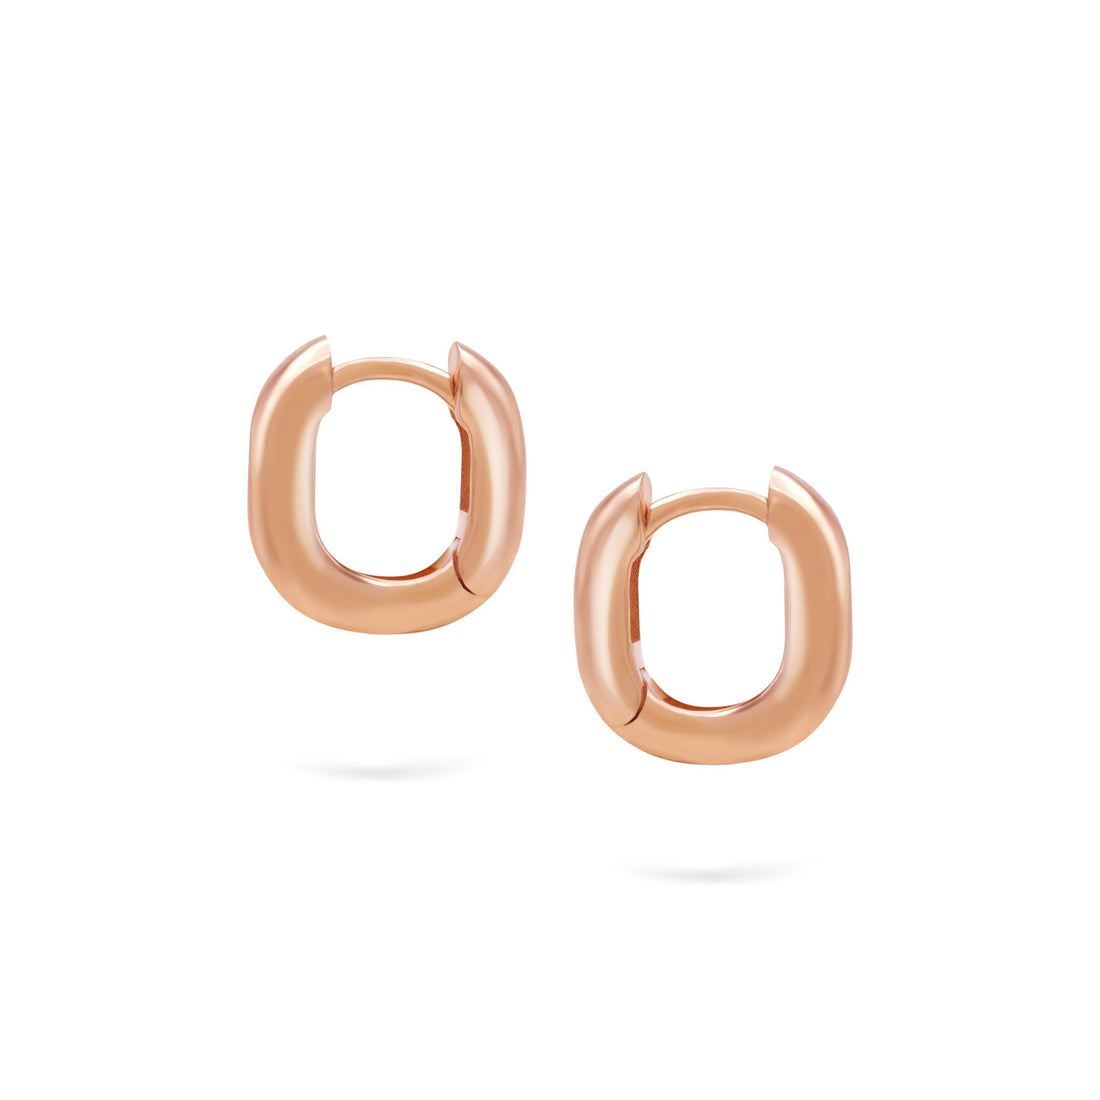 Jewelry Curved Goldens Hoops | Small Gold Earrings | 14K - Rose / Pair - earrings Zengoda Shop online from